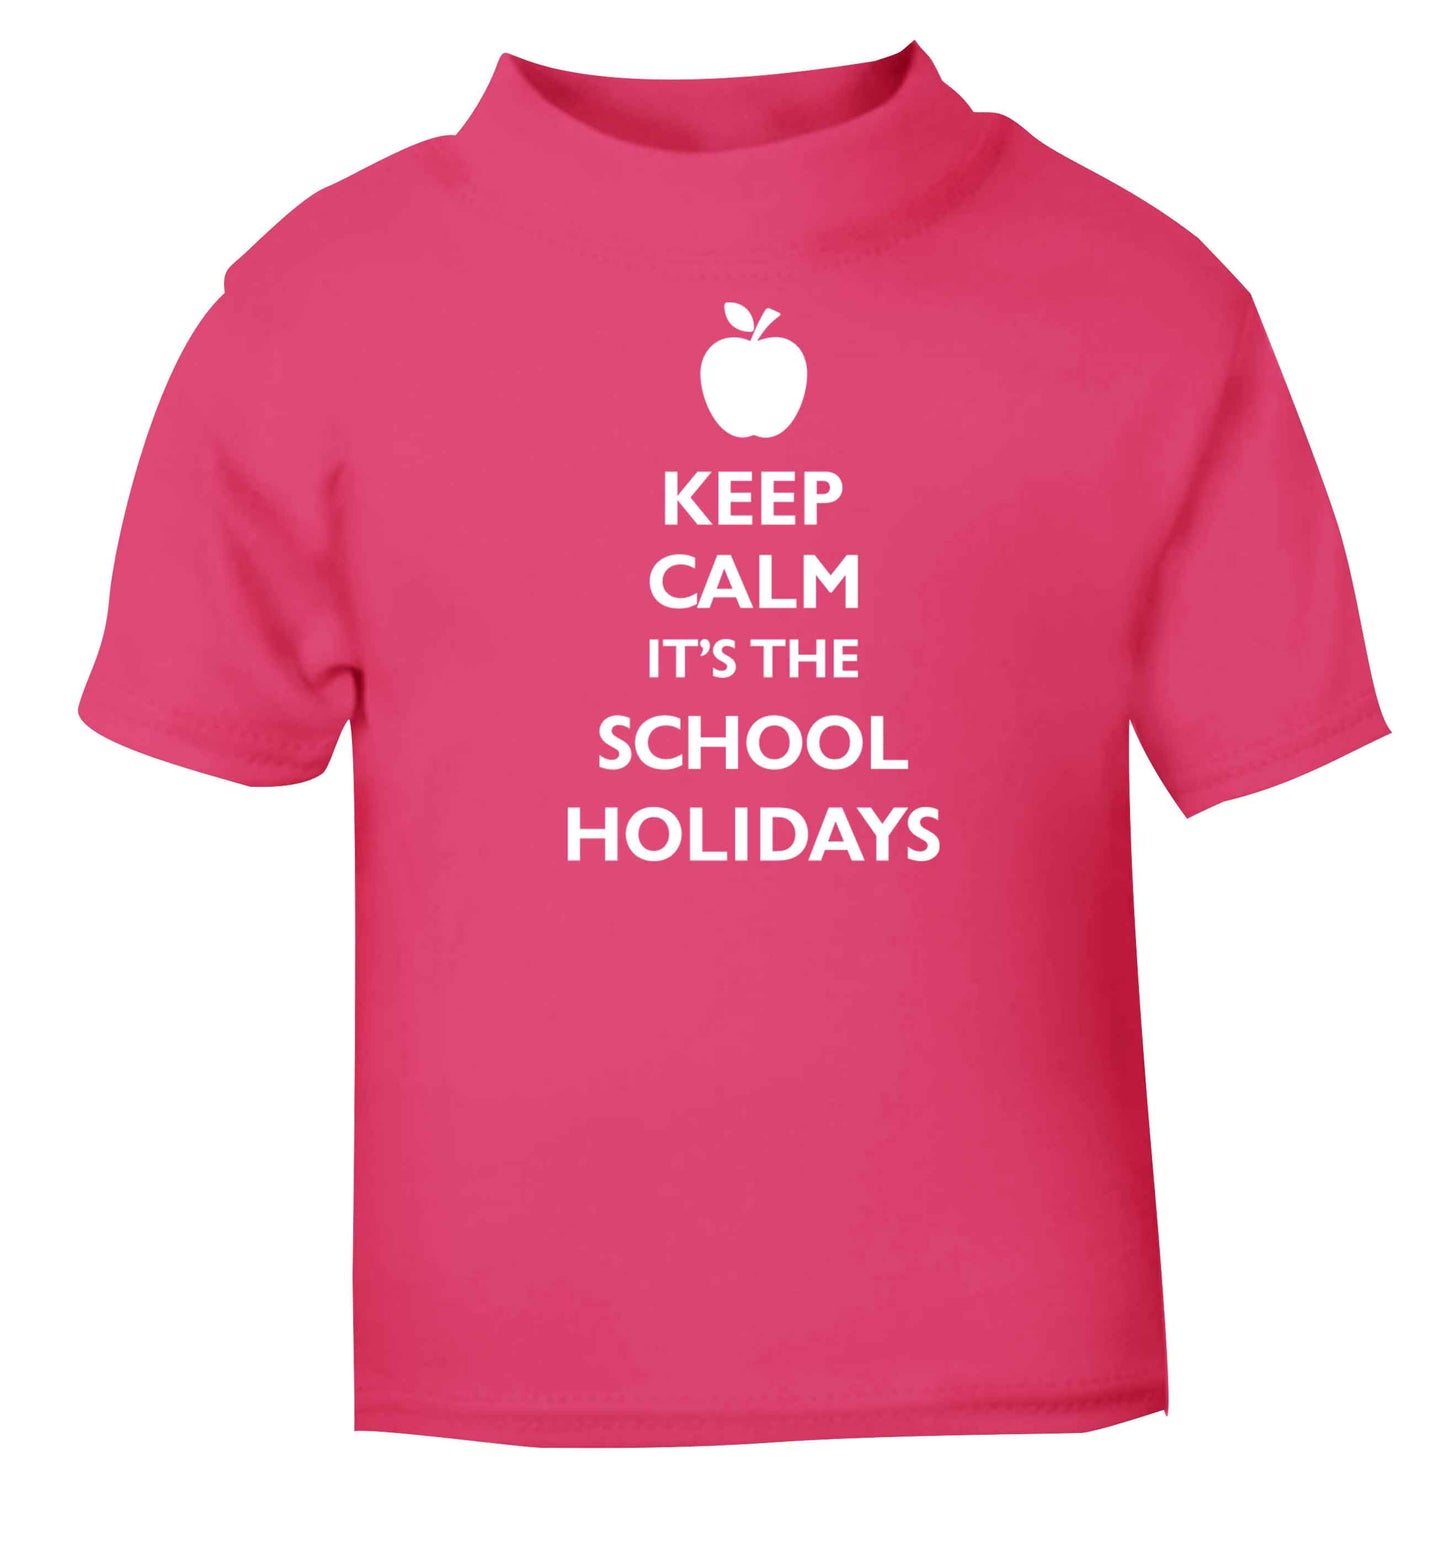 Keep calm it's the school holidays pink baby toddler Tshirt 2 Years